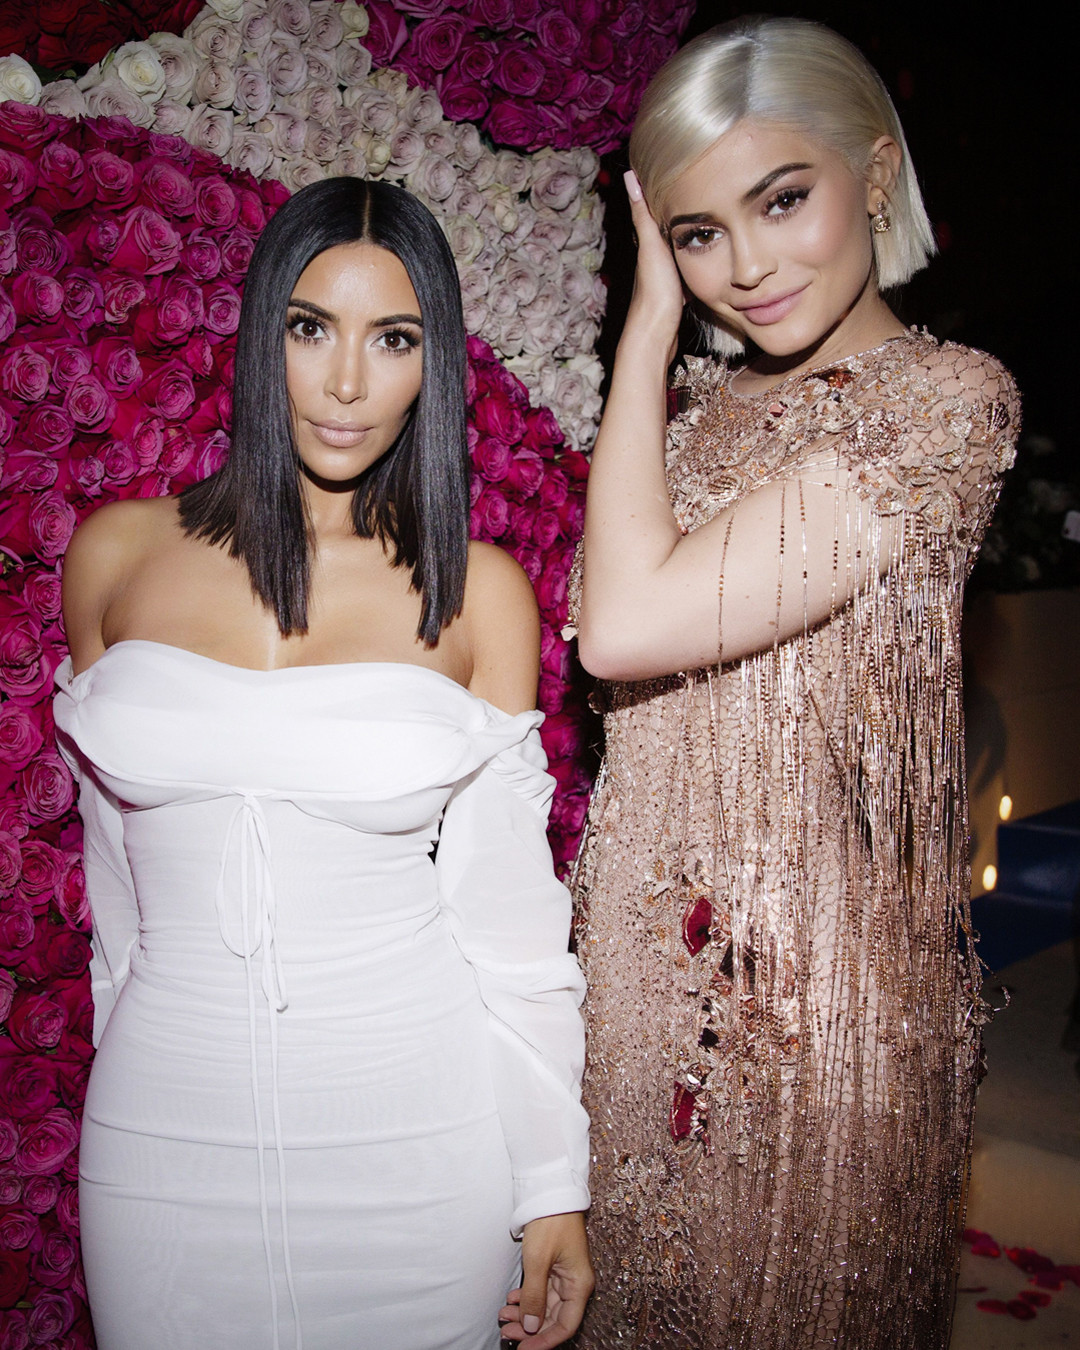 Kim Kardashian and Kylie Jenner's New Collab Launches on Black Friday